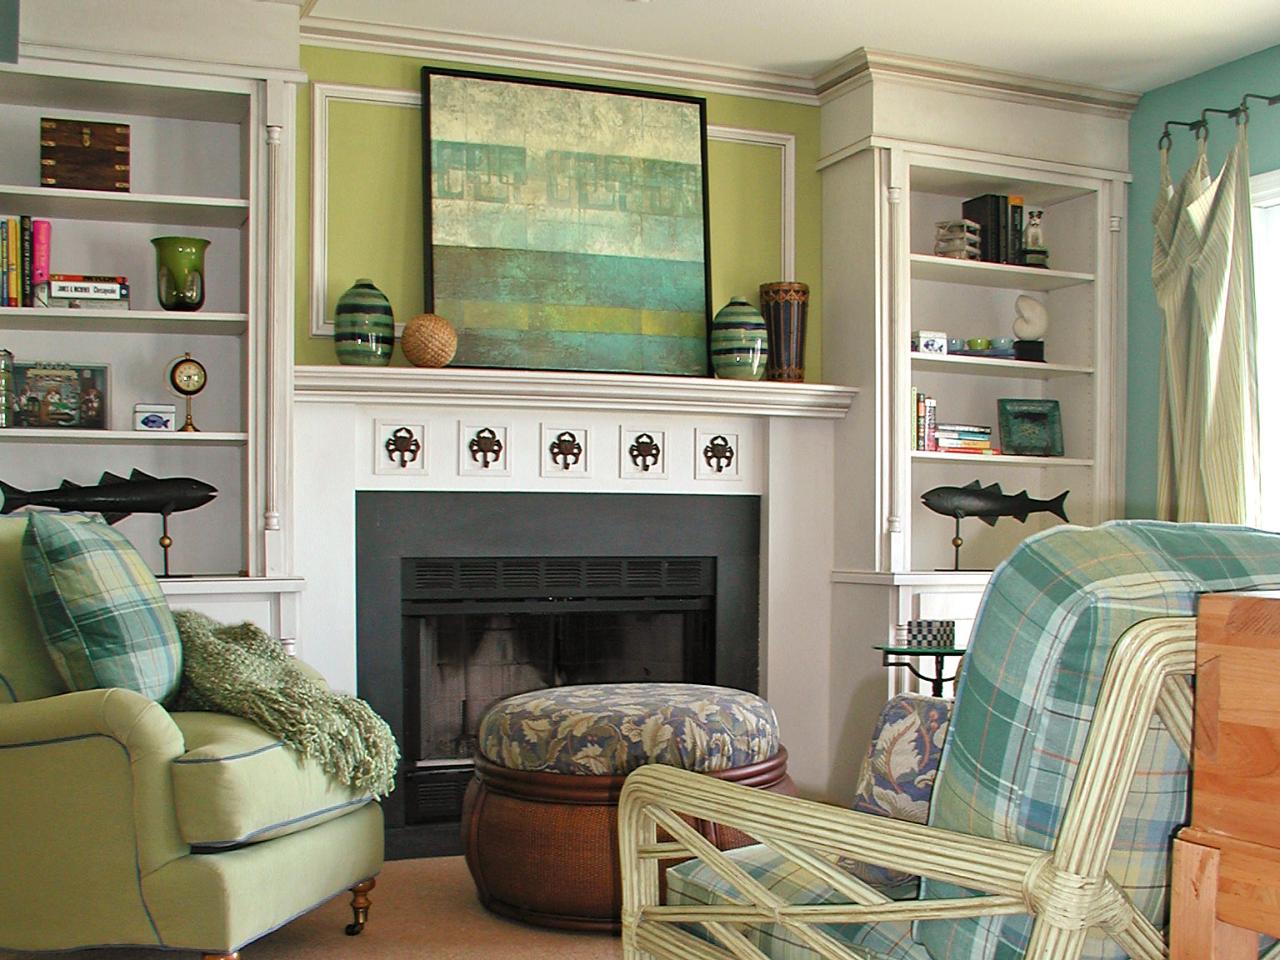 Decorating Ideas for Fireplace Mantels and Walls | DIY ...